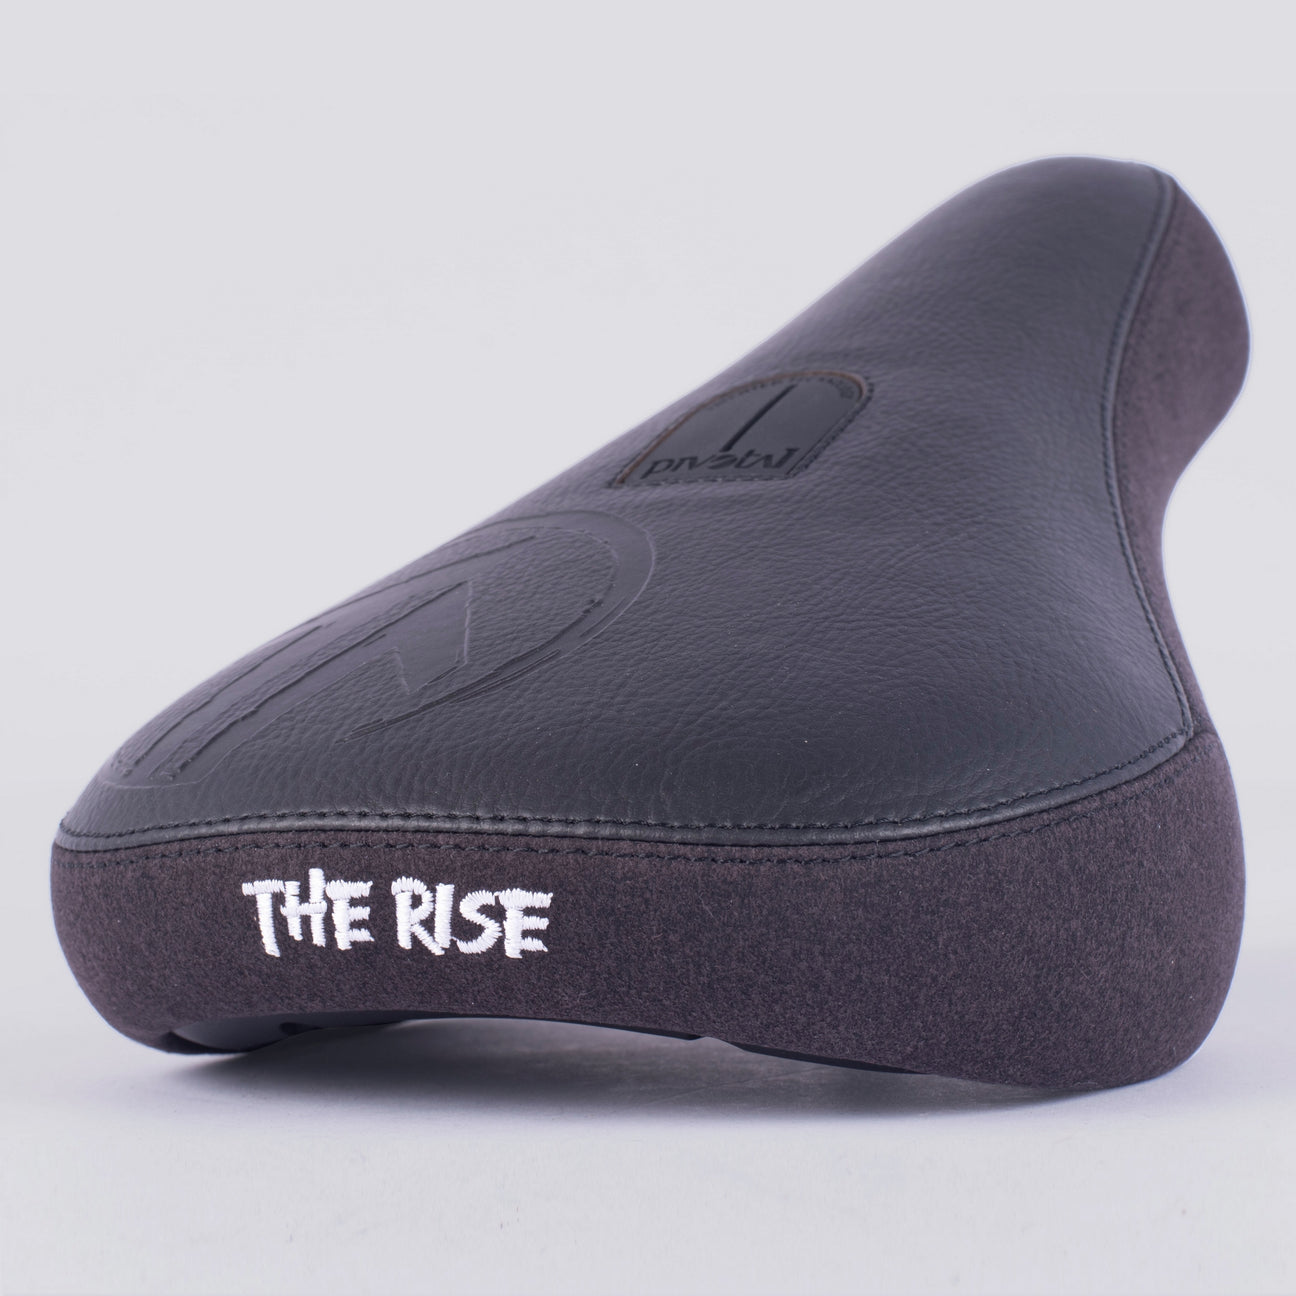 The Rise - Pivotal Seat